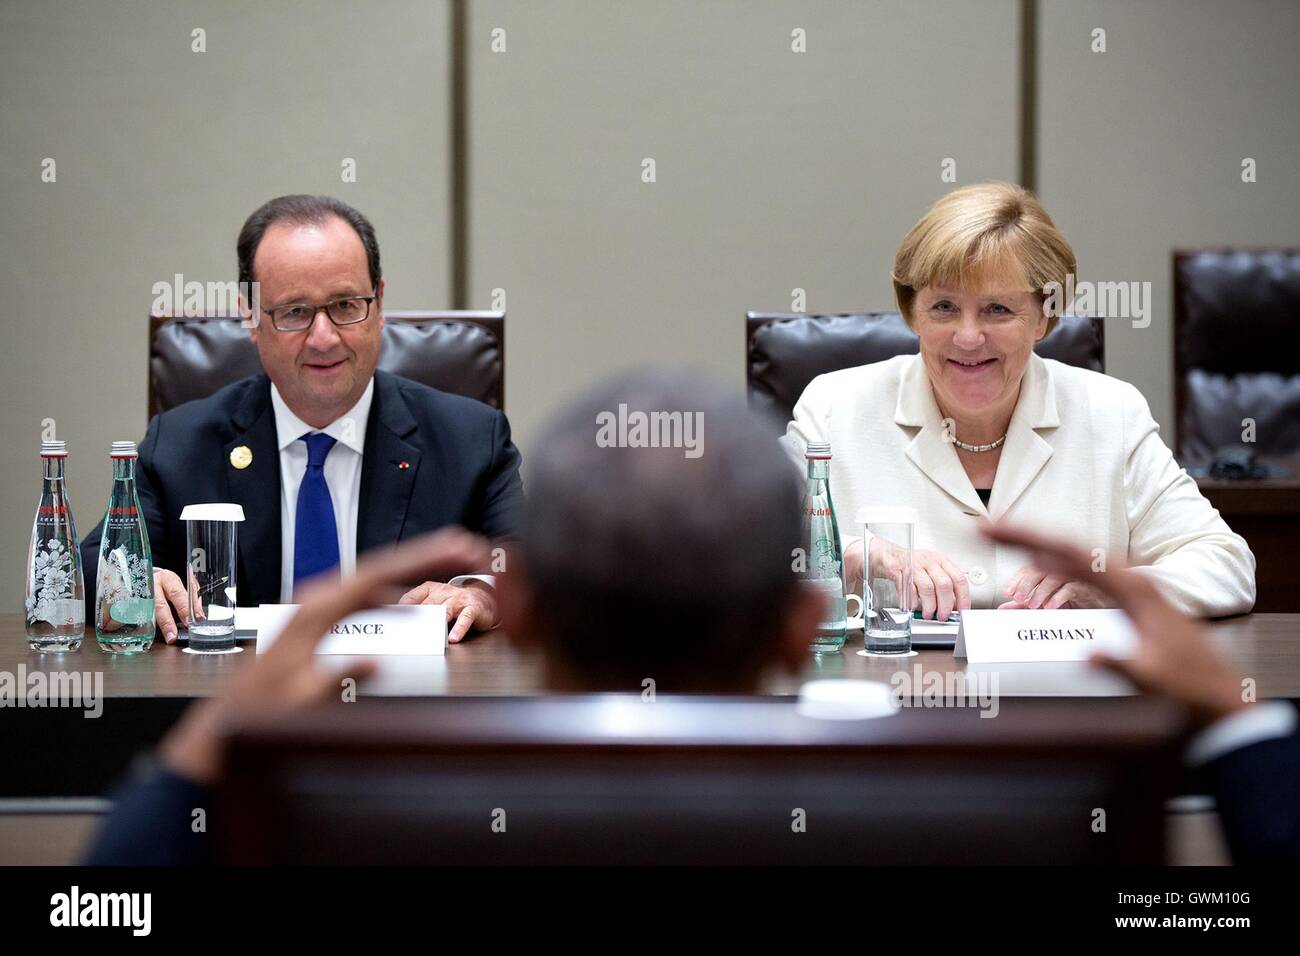 U.S President Barack Obama meets with French President Franois Hollande and German Chancellor Angela Merkel at the Hangzhou International Expo Center during the G20 summit September 5, 2016 in Hangzhou, China. Stock Photo